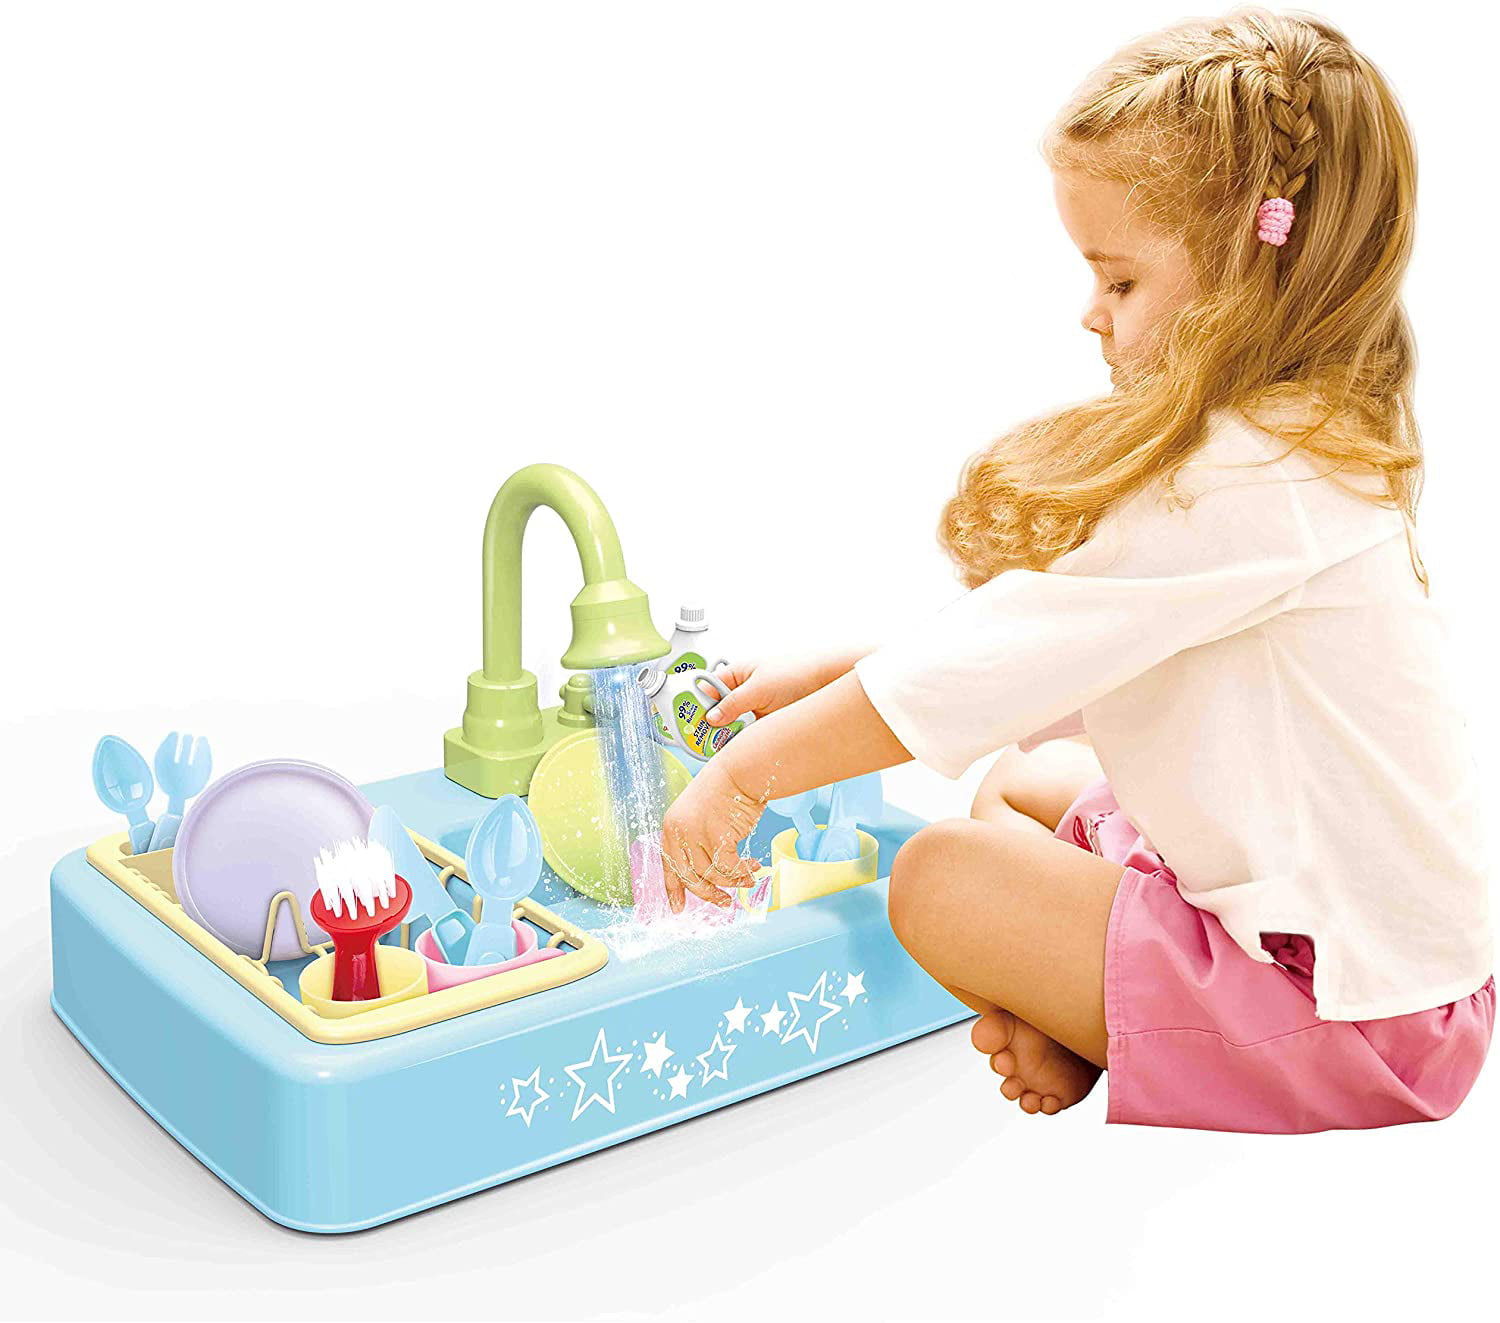 Sink Drain and 16 Accessories Included IQ Toys 18 Piece Deluxe Modern Dishes Play Set Pretend Play Wash Up Kitchen Sink with Real Running Water